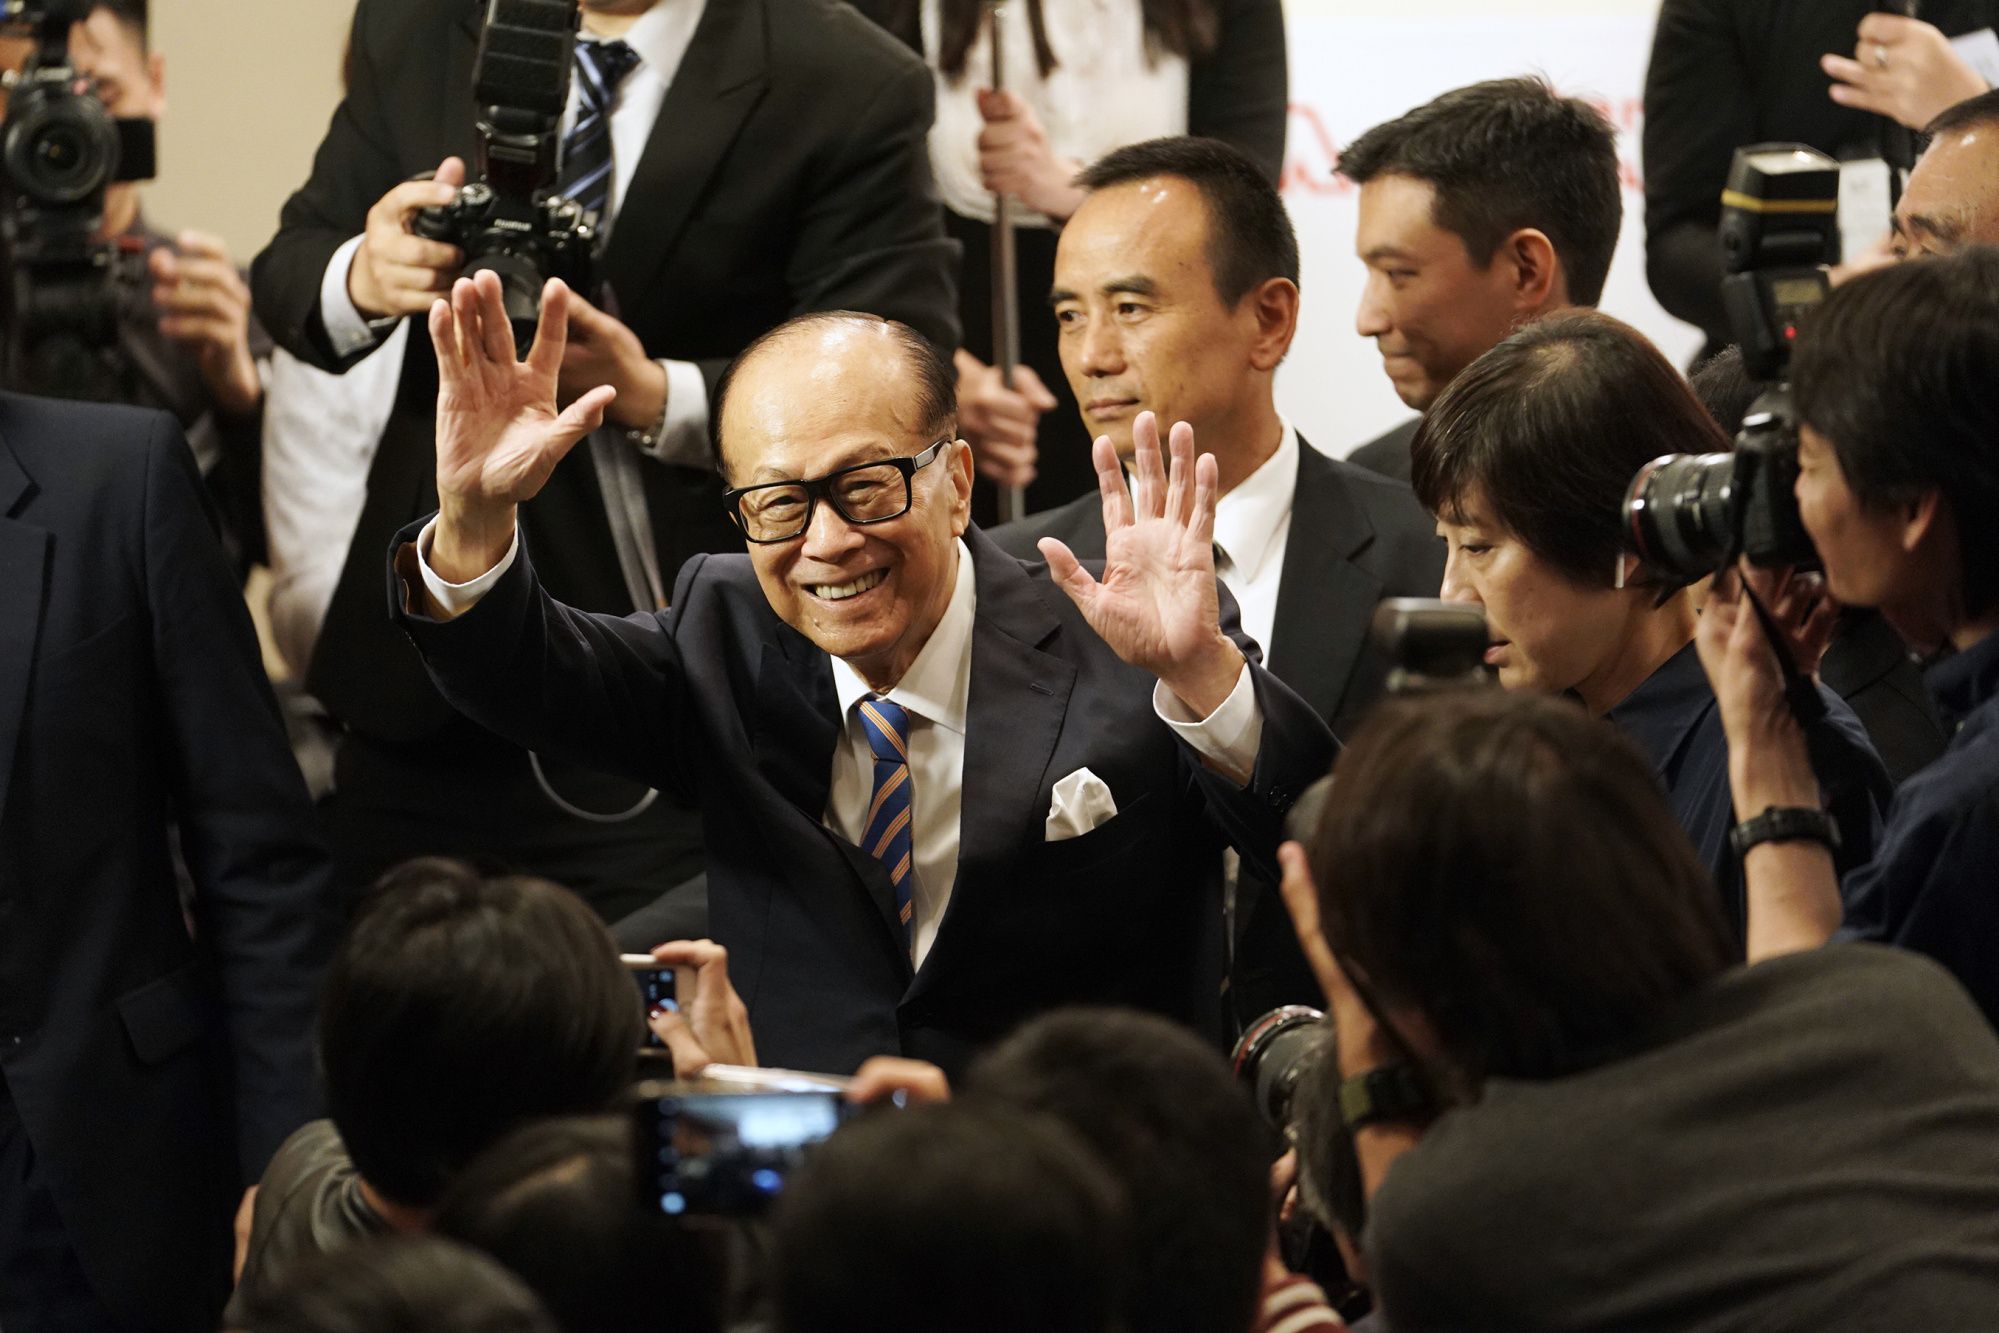 Zoom funding stemmed from Li Ka-shing's disgust at costly video gear